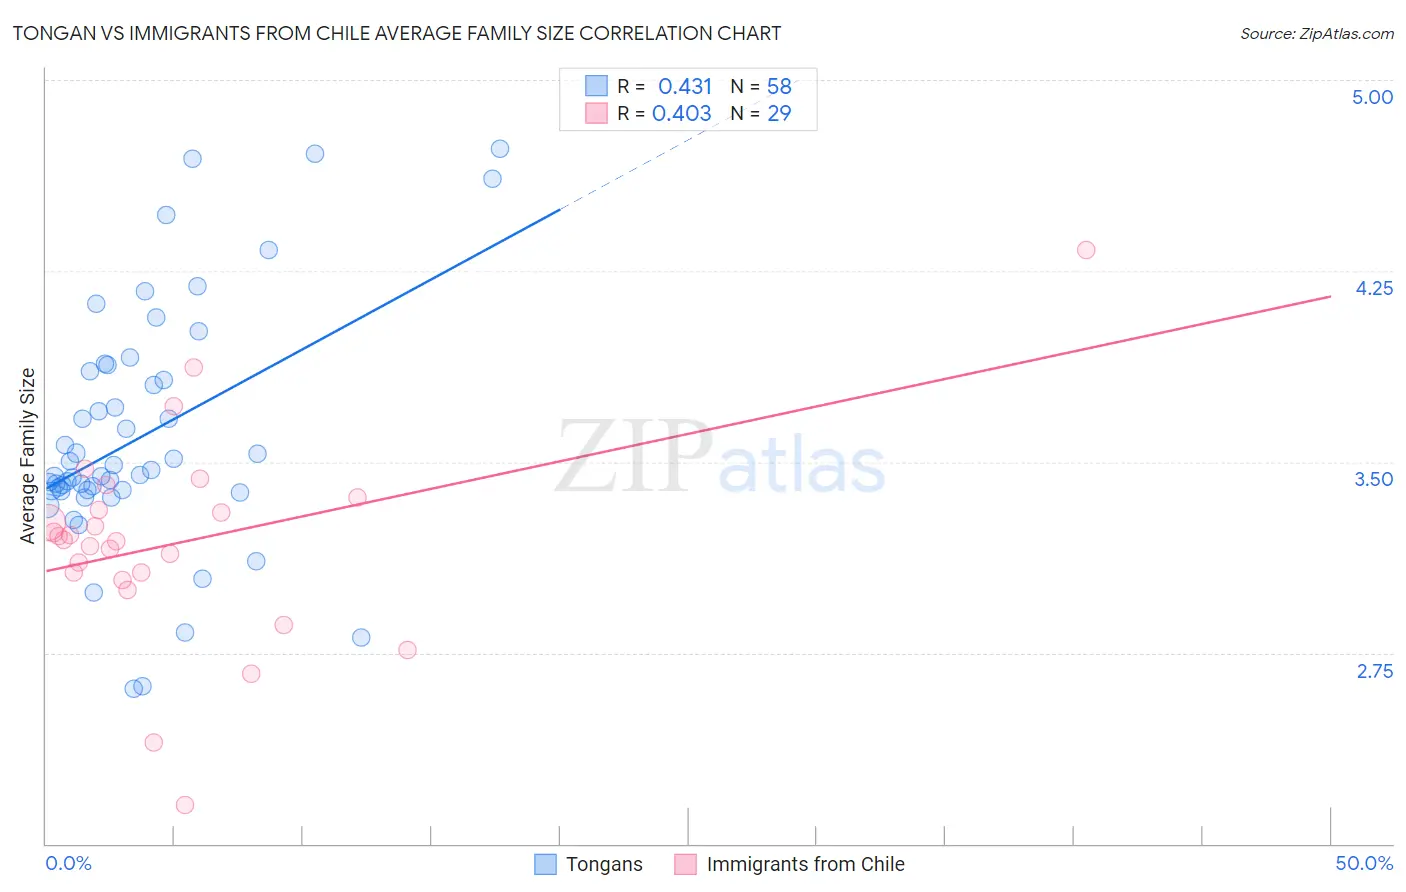 Tongan vs Immigrants from Chile Average Family Size